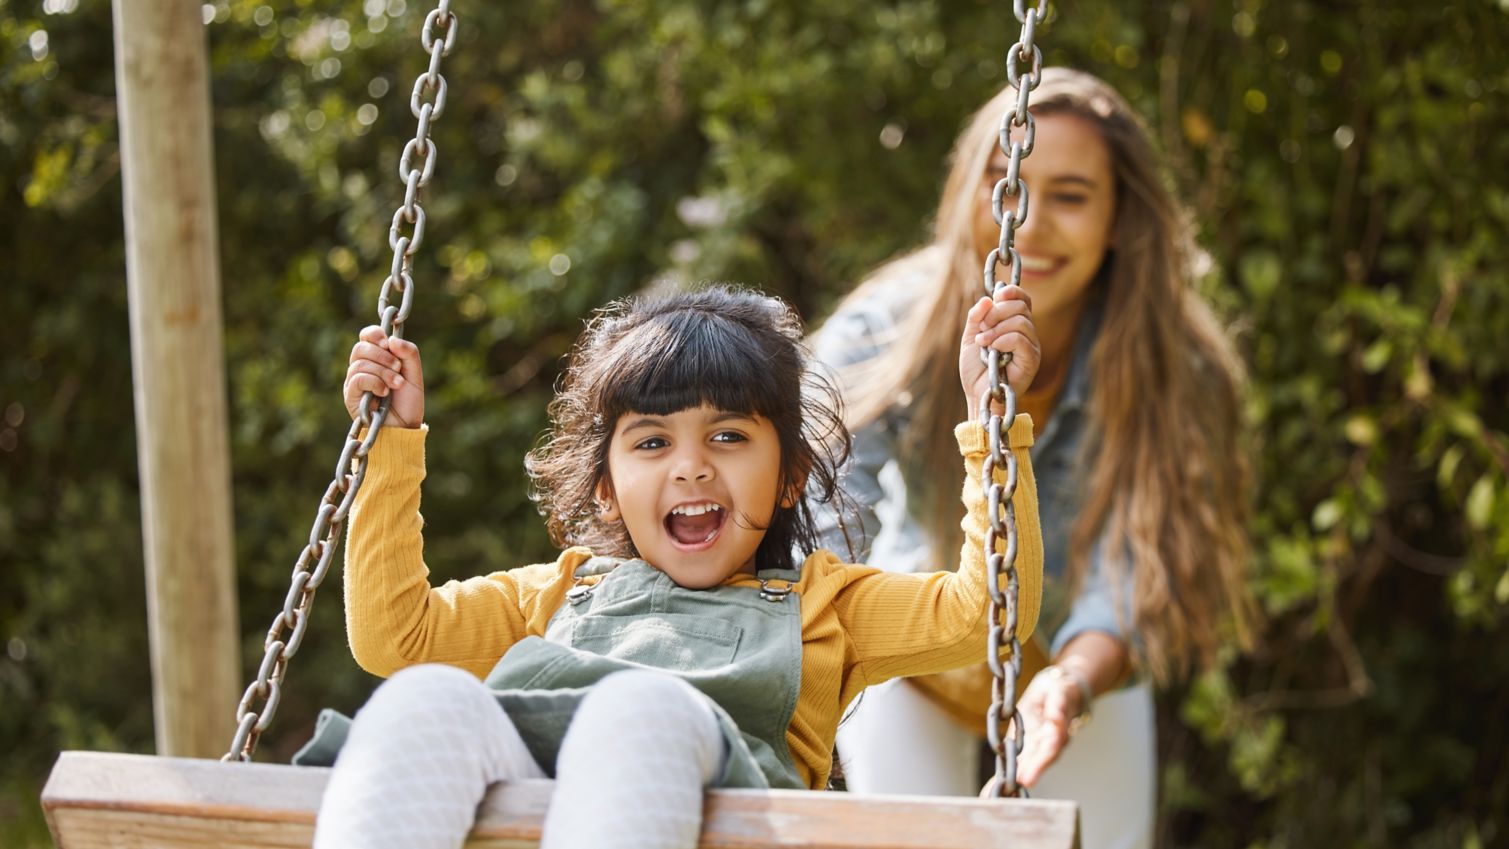 Child being pushed on a swing by an adult.